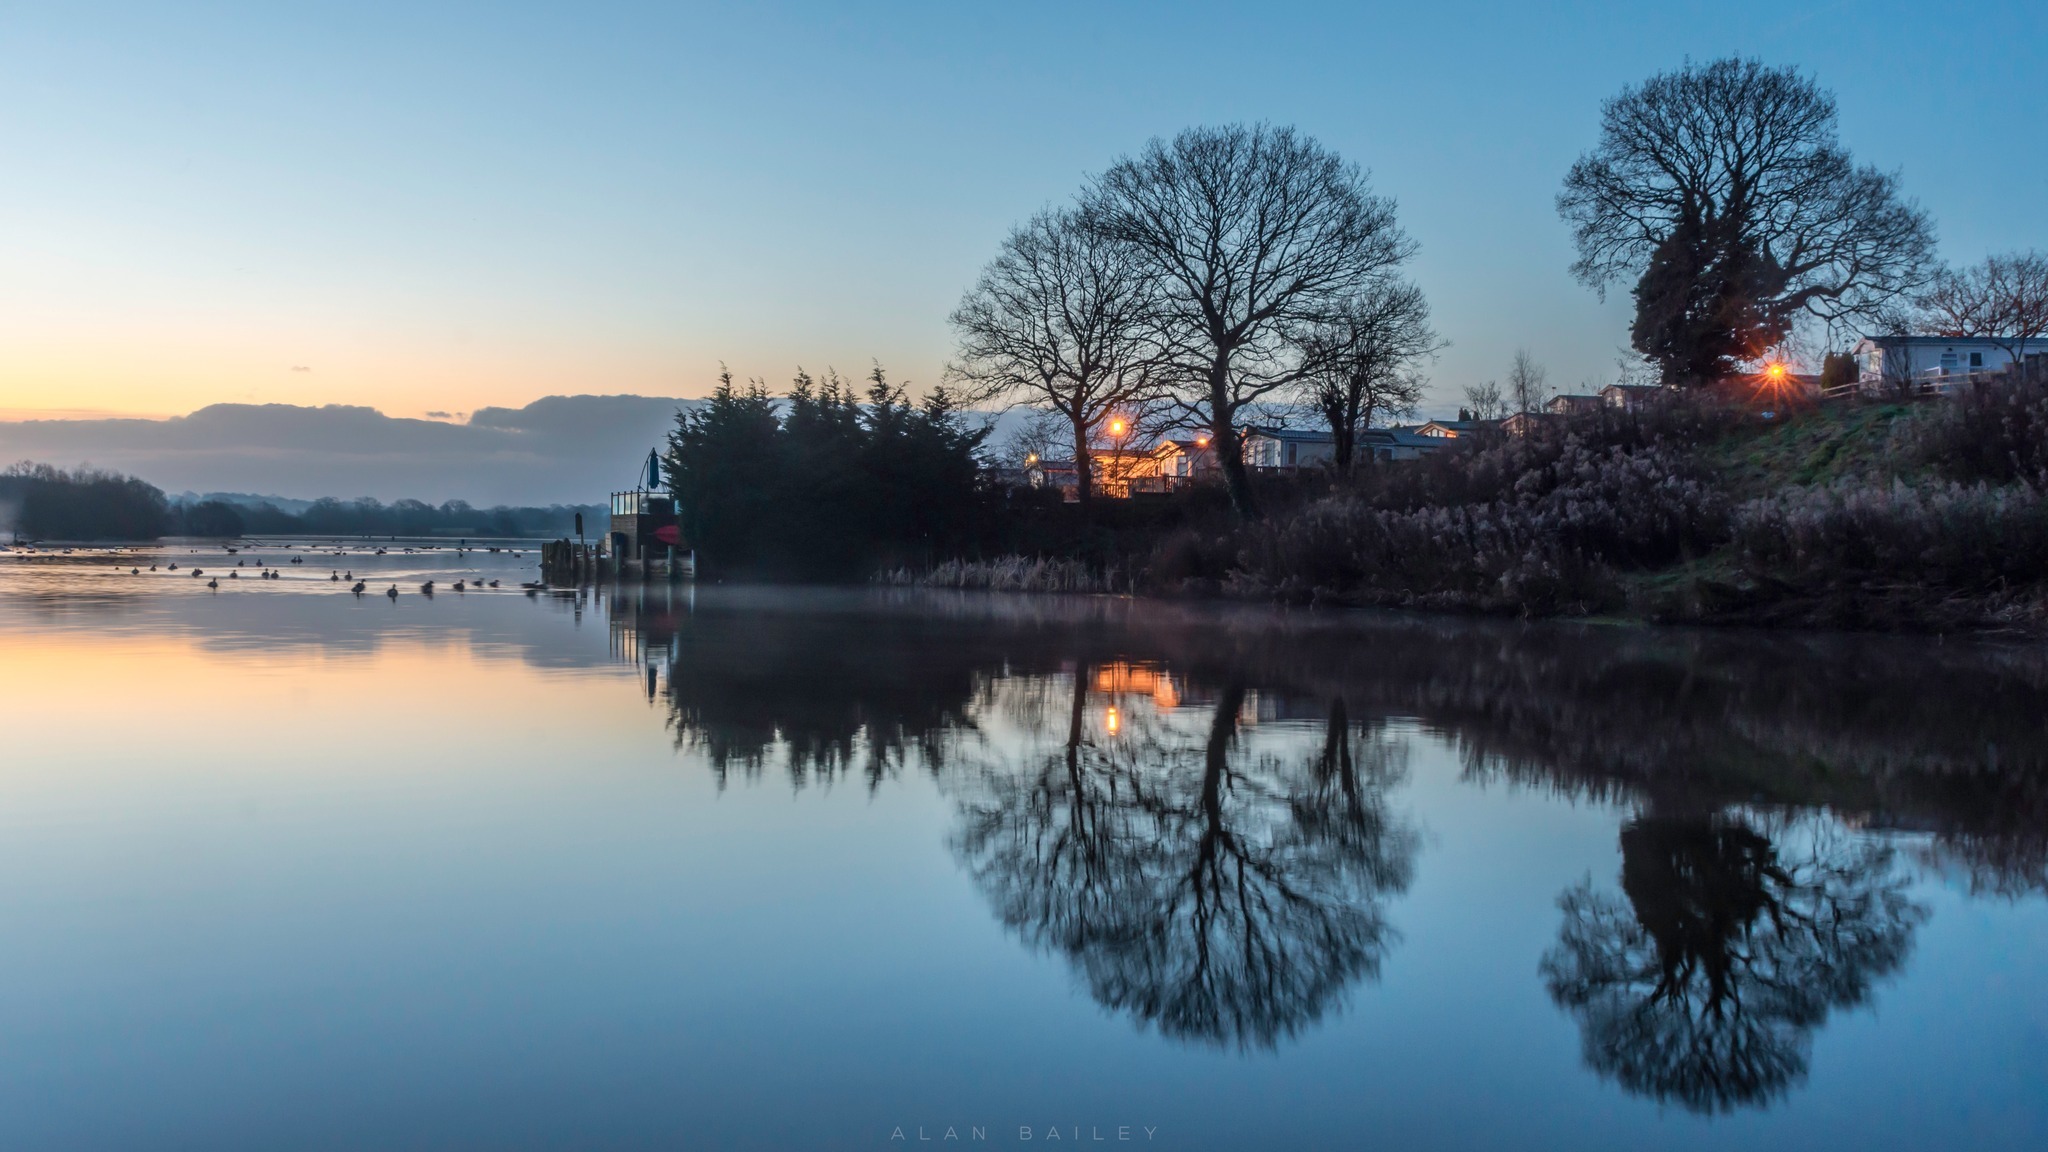 Just before sunrise in the blue hour at Winsford Flash by Alan Bailey